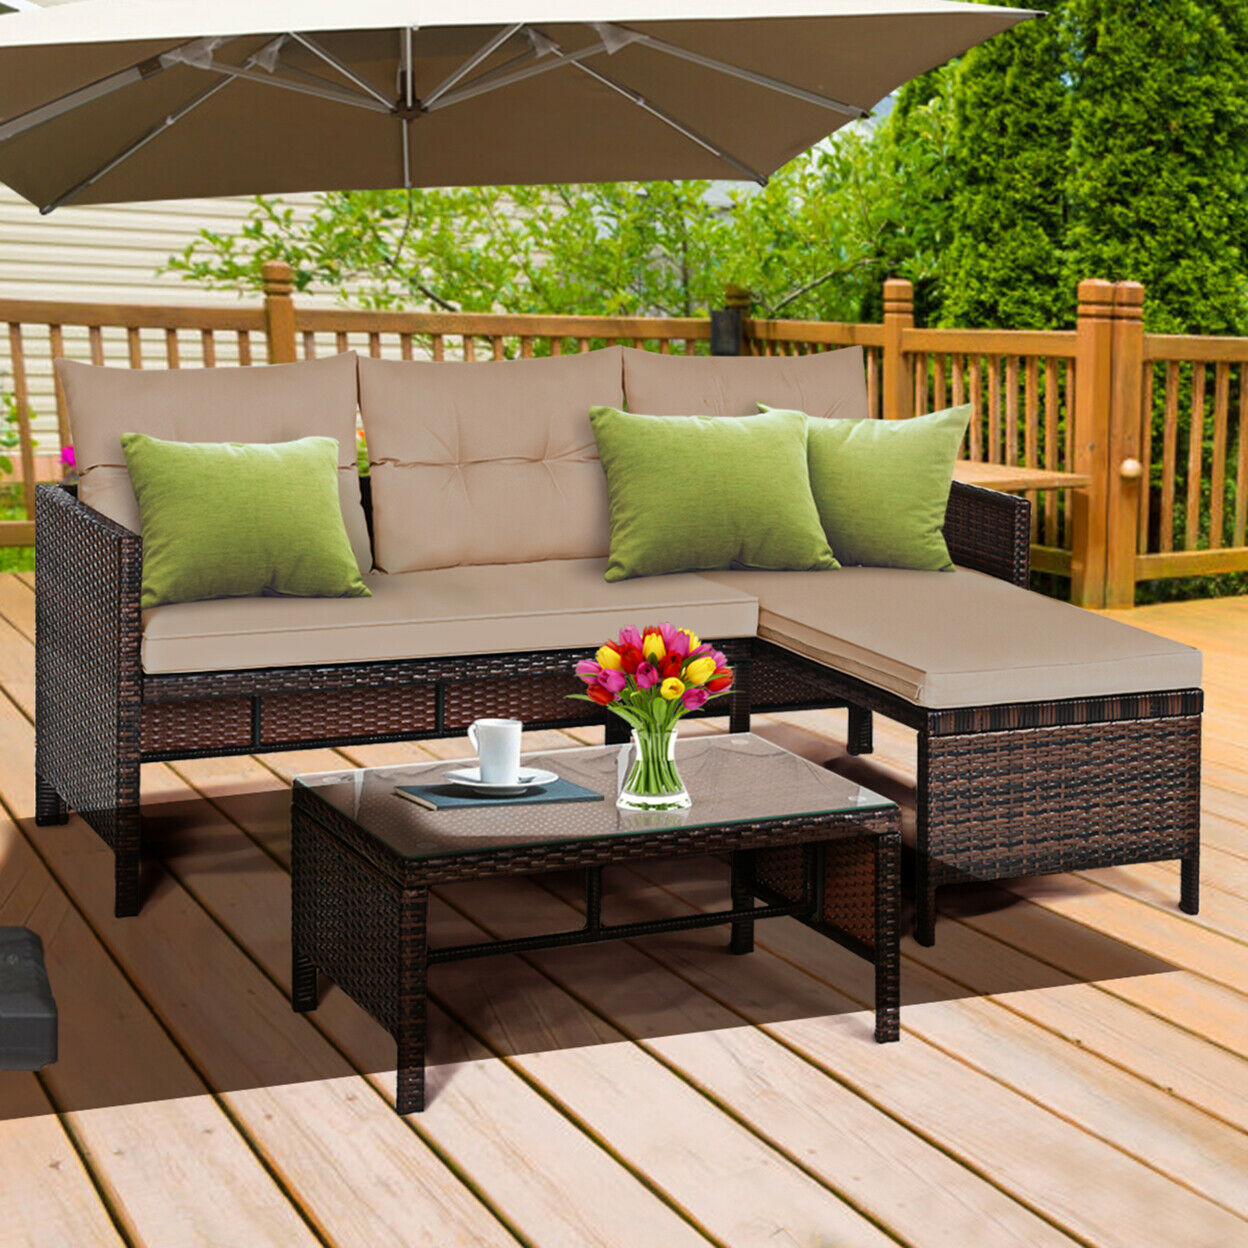 Gymax 3Pcs Outdoor Rattan Furniture Set Patio Couch Sofa Set W/ Coffee Table